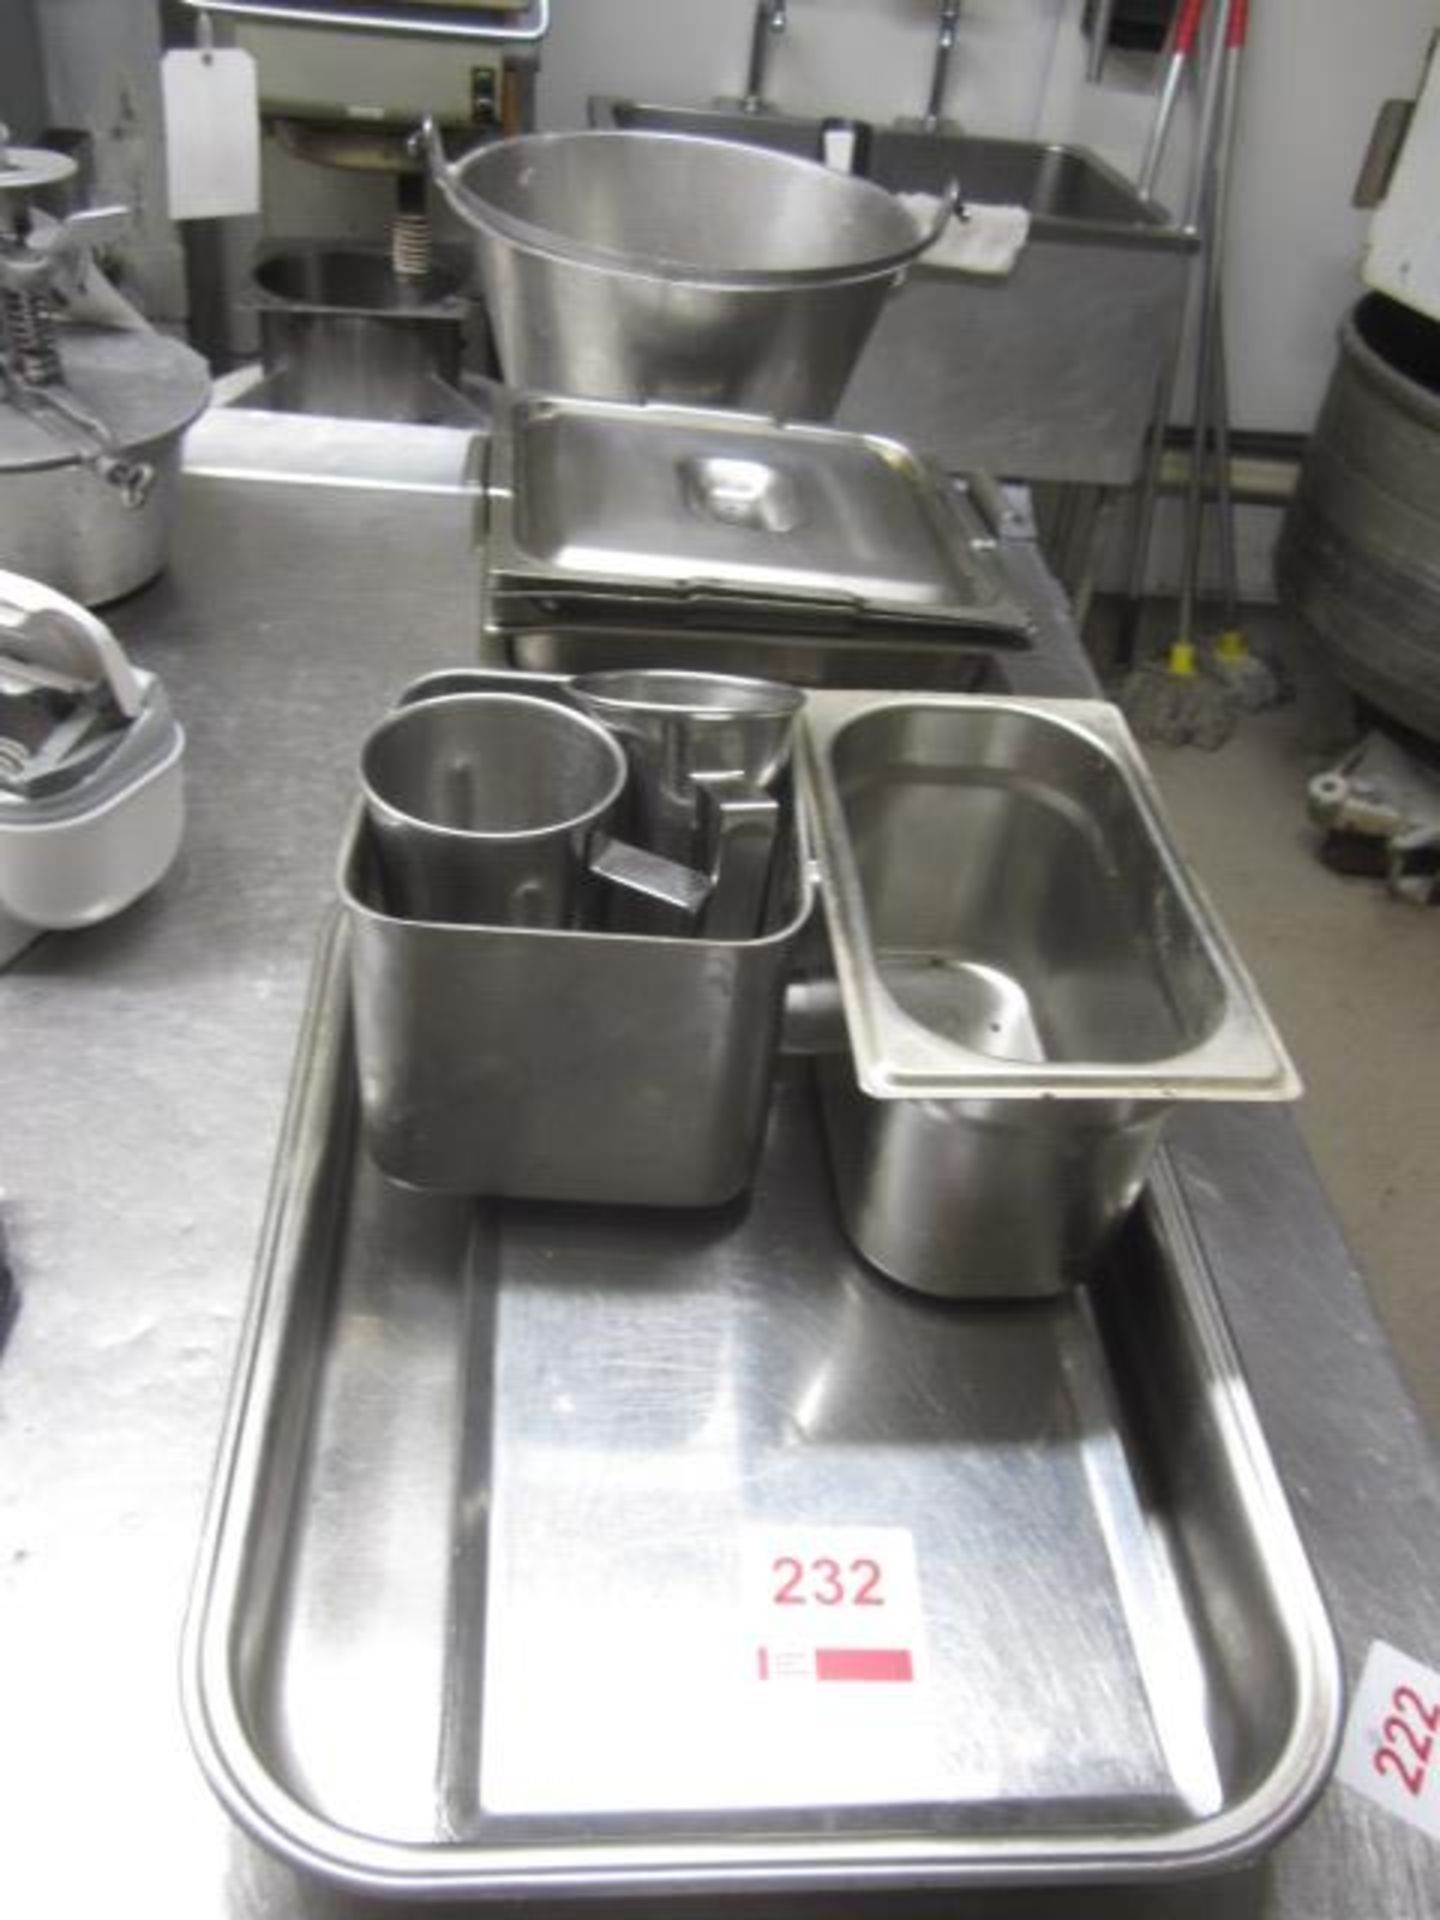 Assorted stainless Steel trays, pots etc., as lotted **Located: Puddy Mark Café, High Street,